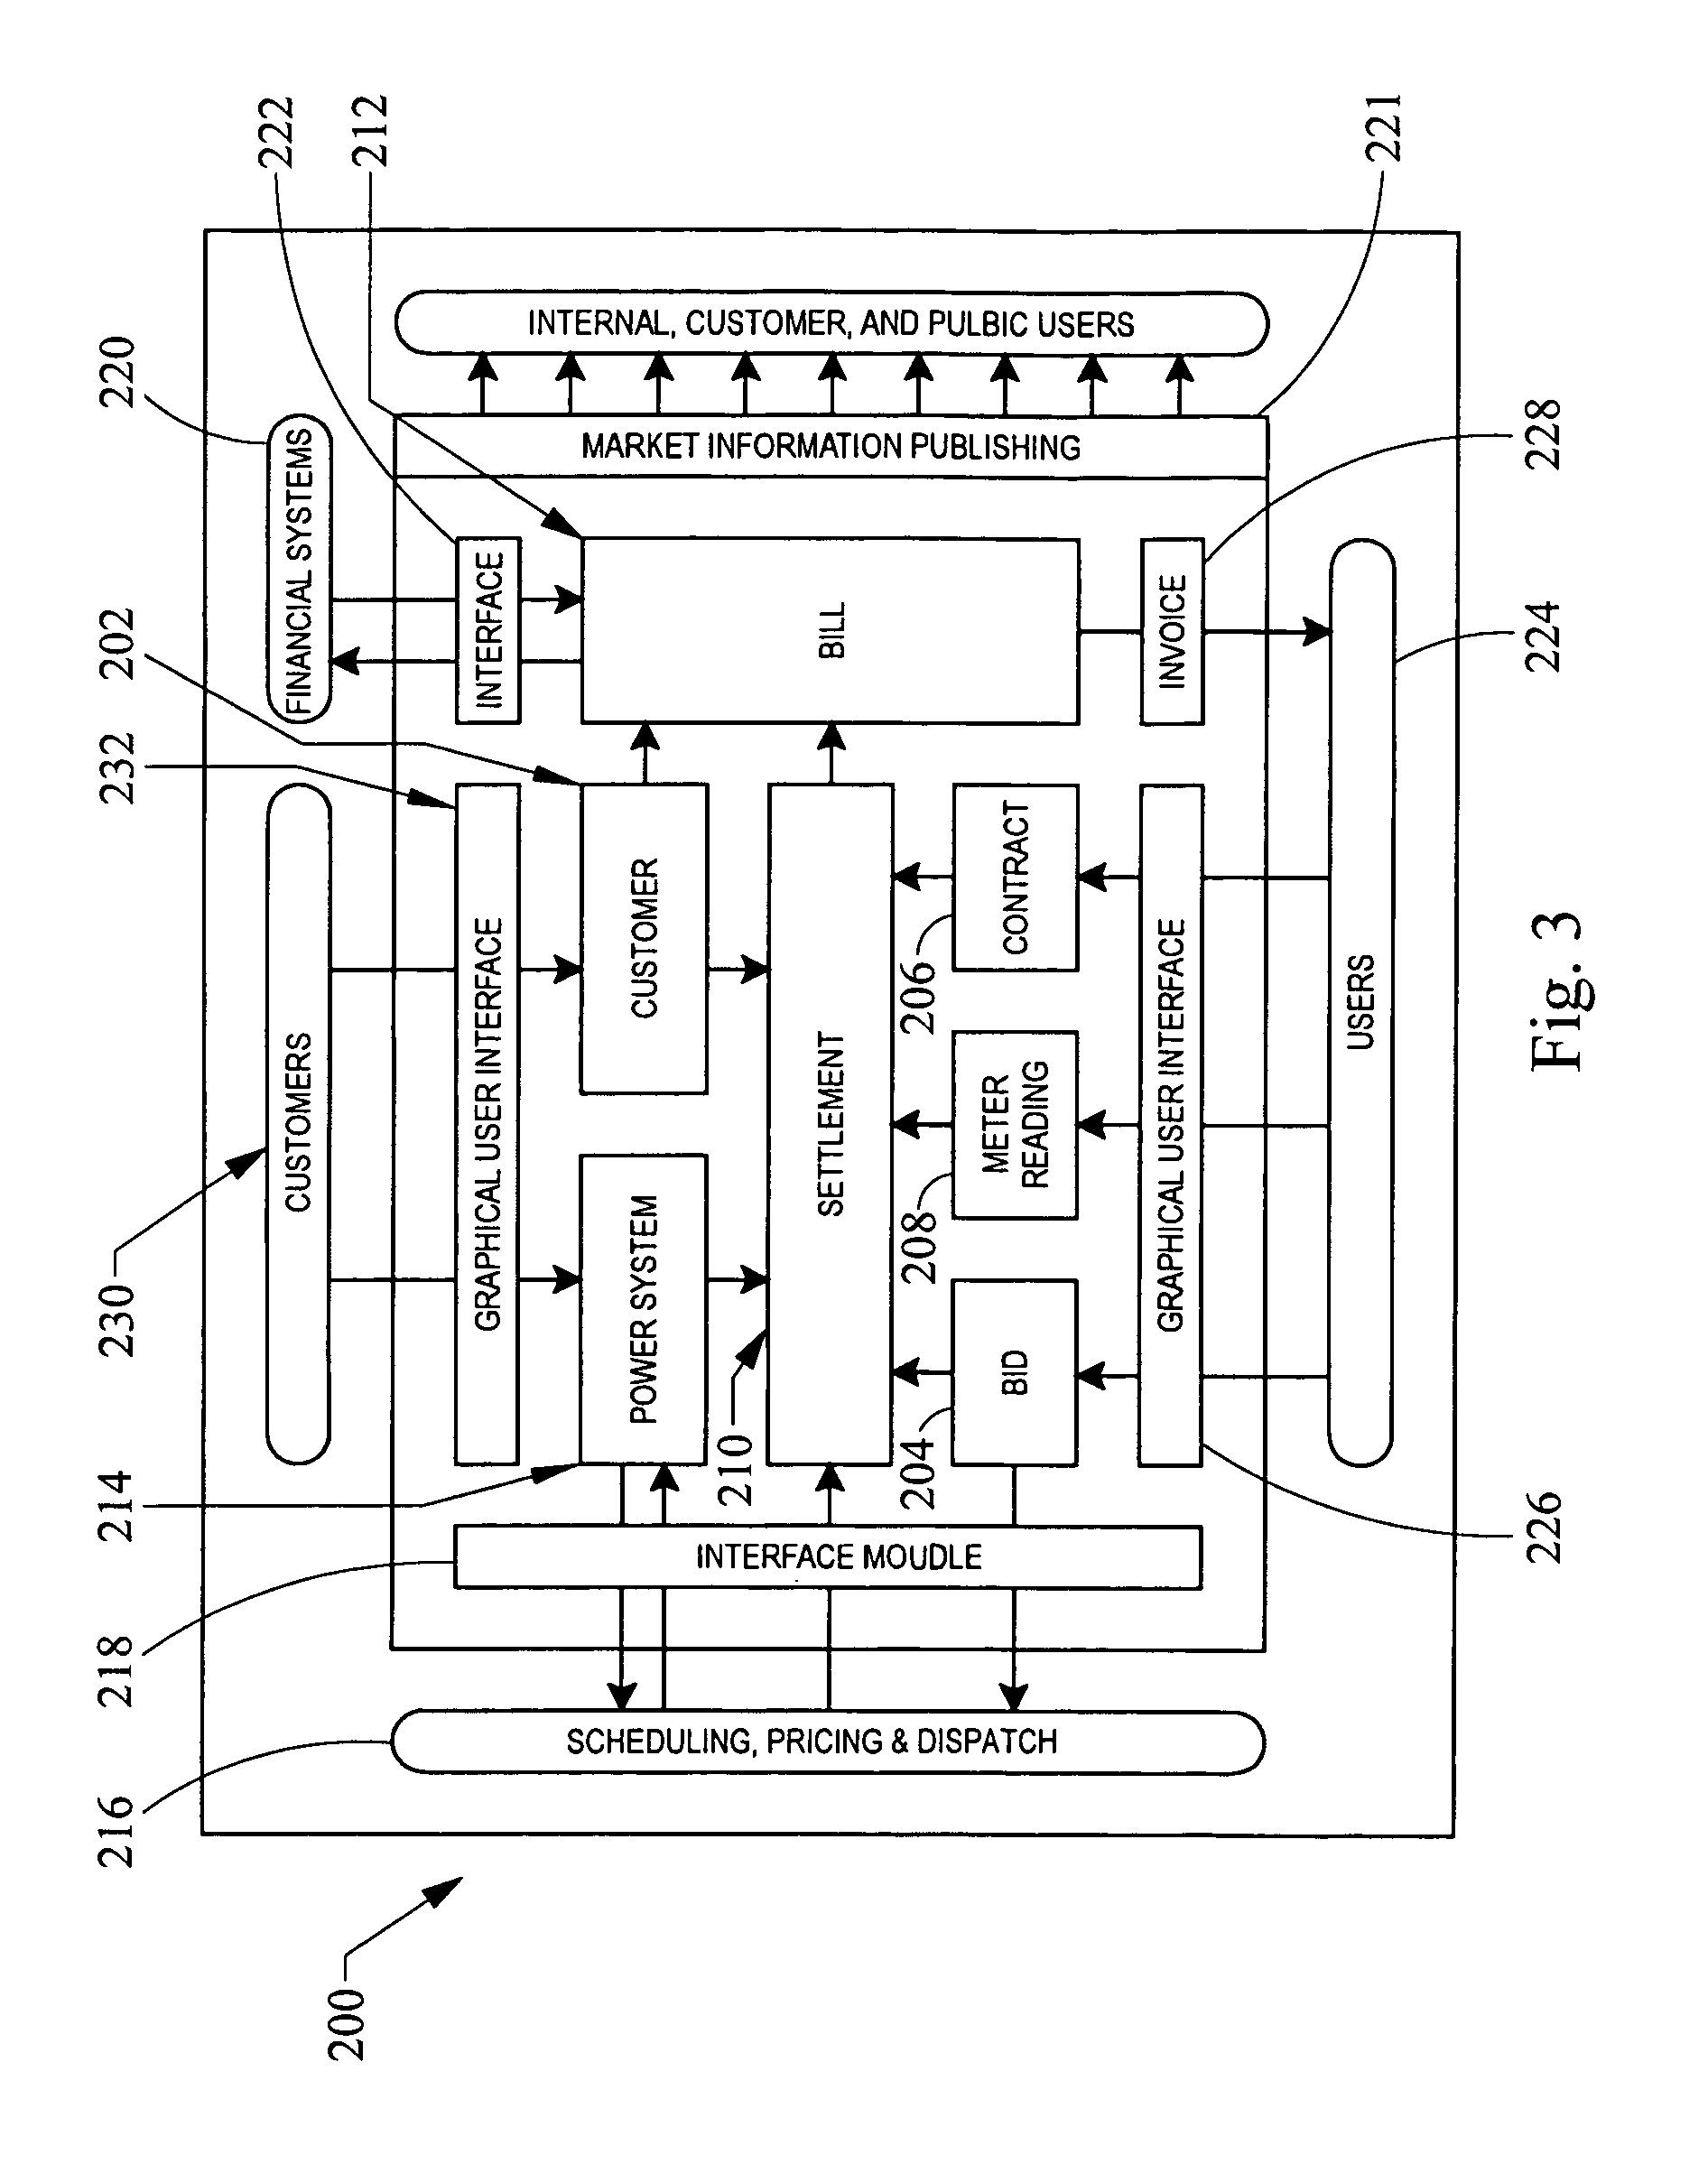 Method and system for facilitating, coordinating and managing a competitive marketplace